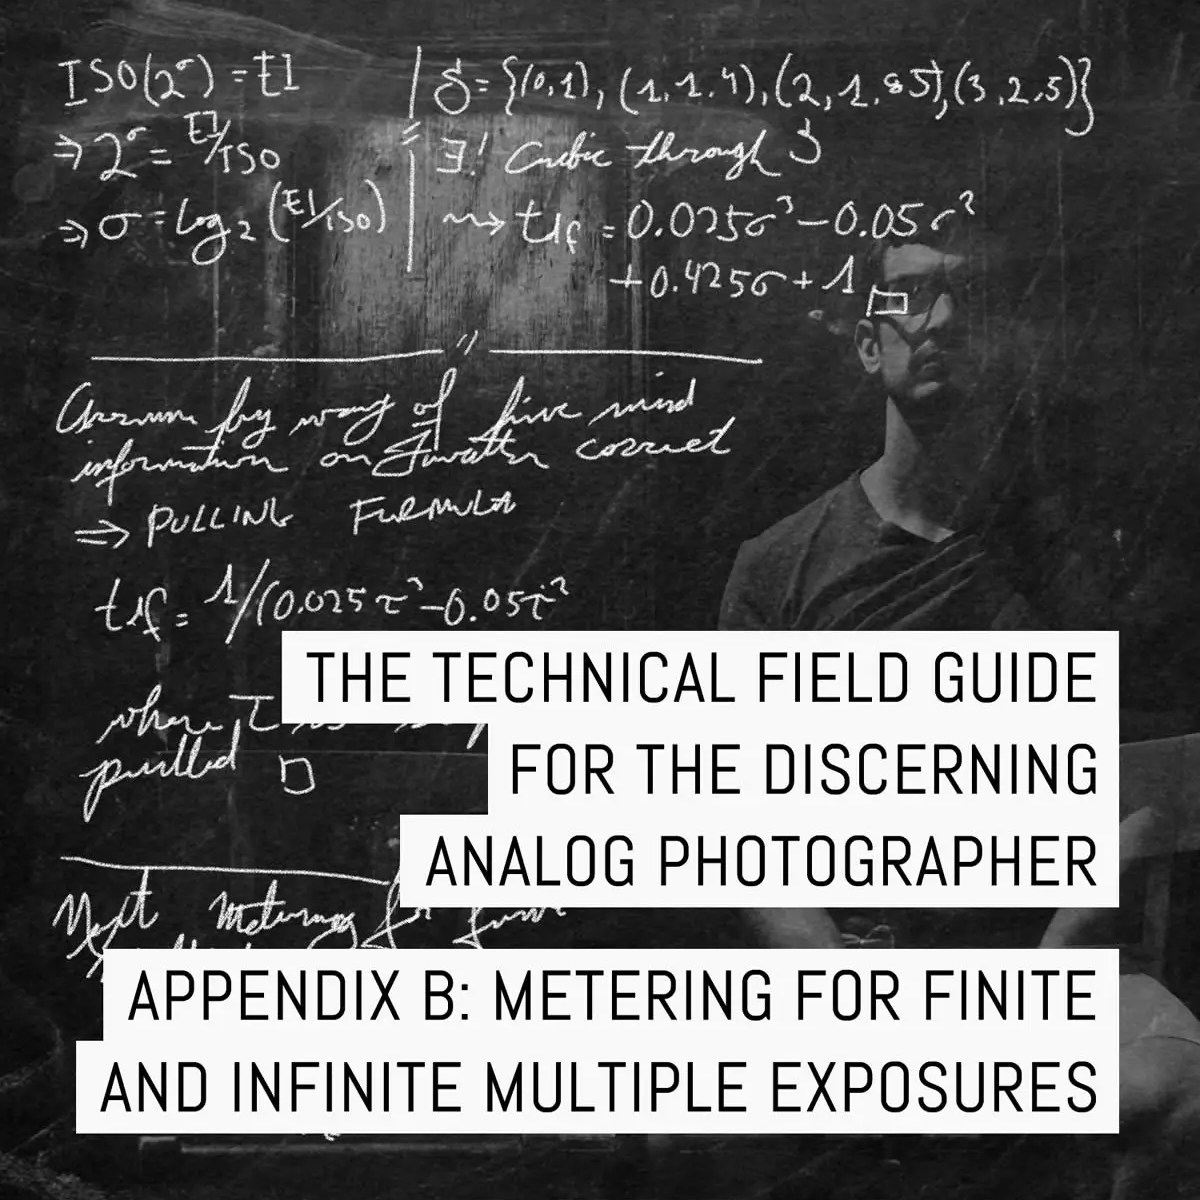 Cover - Appendix B of the Technical Field Guide for the Discerning Analog Photographer- Metering for finite and infinite multiple exposures